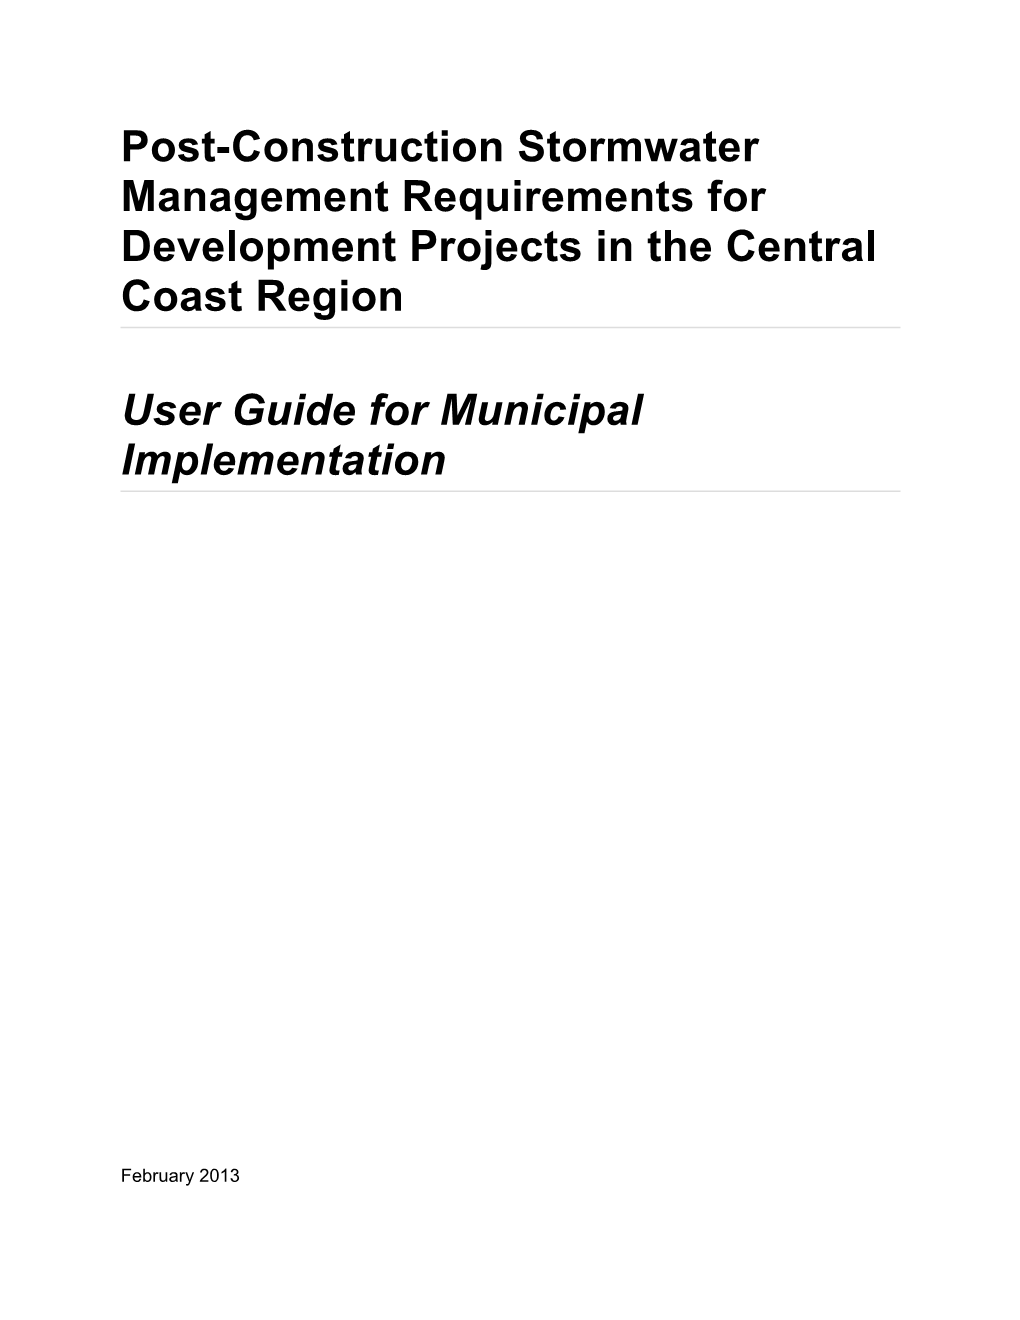 User Guide for Municipal Implementation